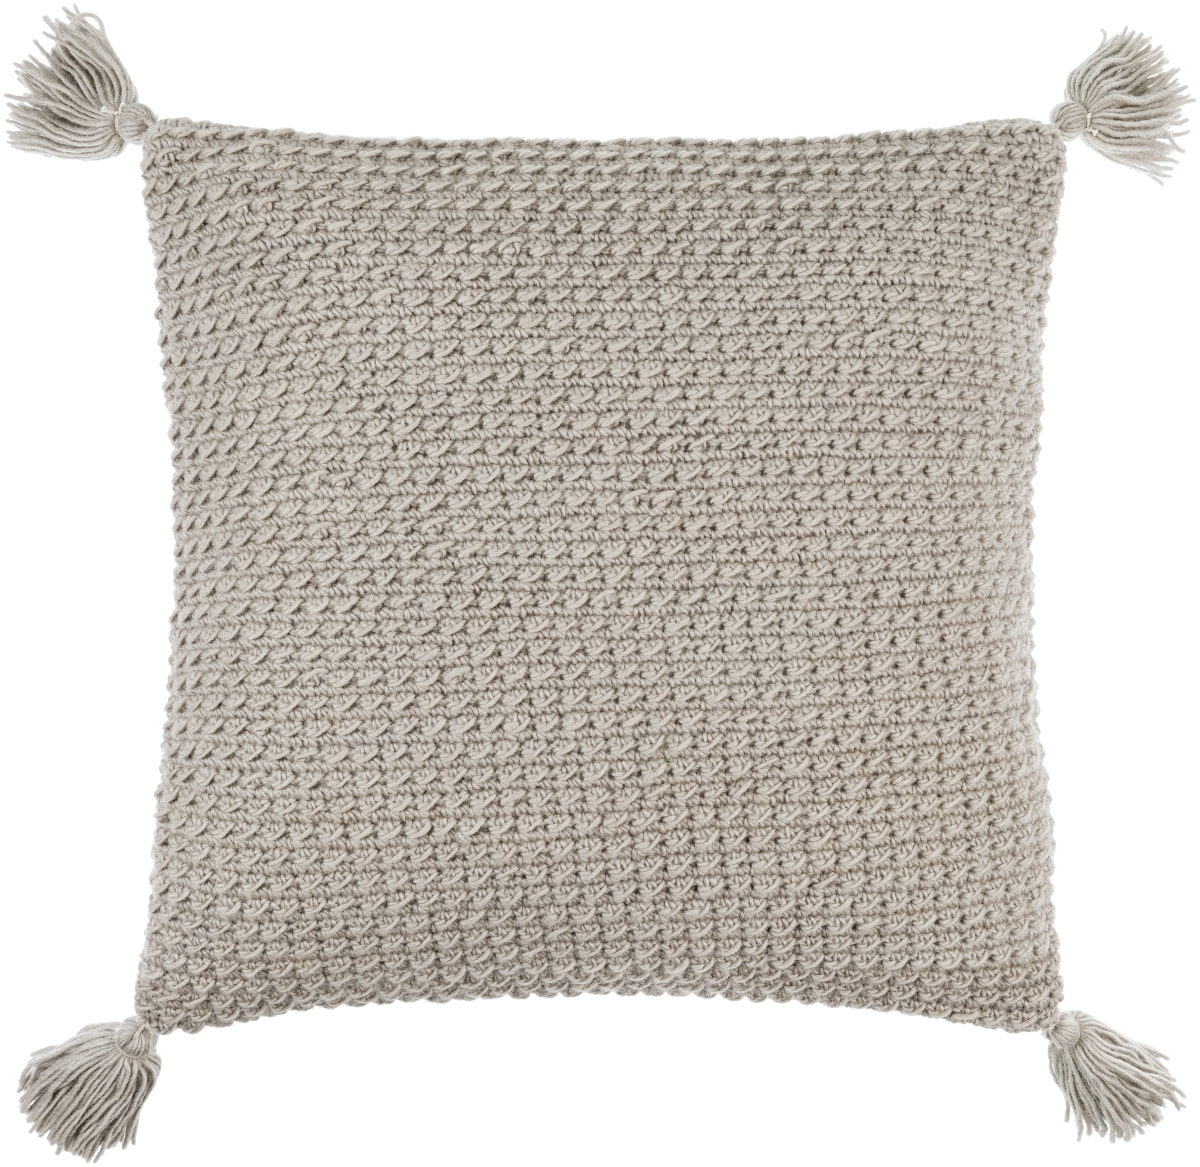 Picture of Livabliss MKO002-2222 22 x 22 in. Makrome Square Pillow Cover